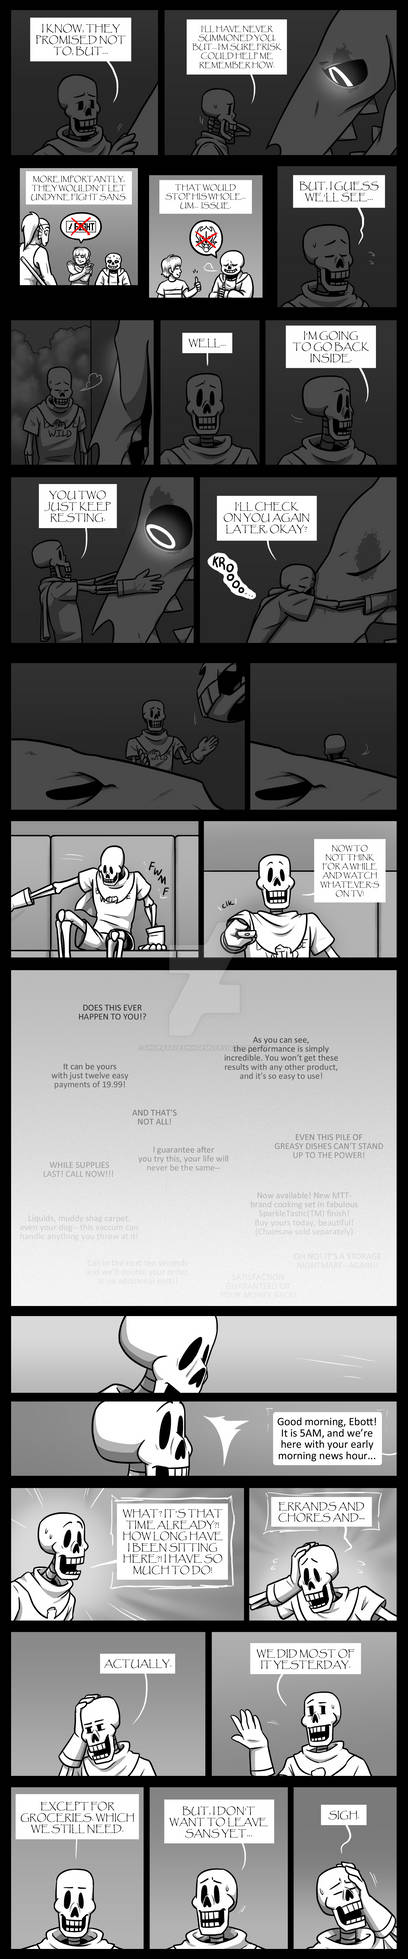 Unexpected Guests: Chapter 8, Part 7 by UndertaleThingems on DeviantArt